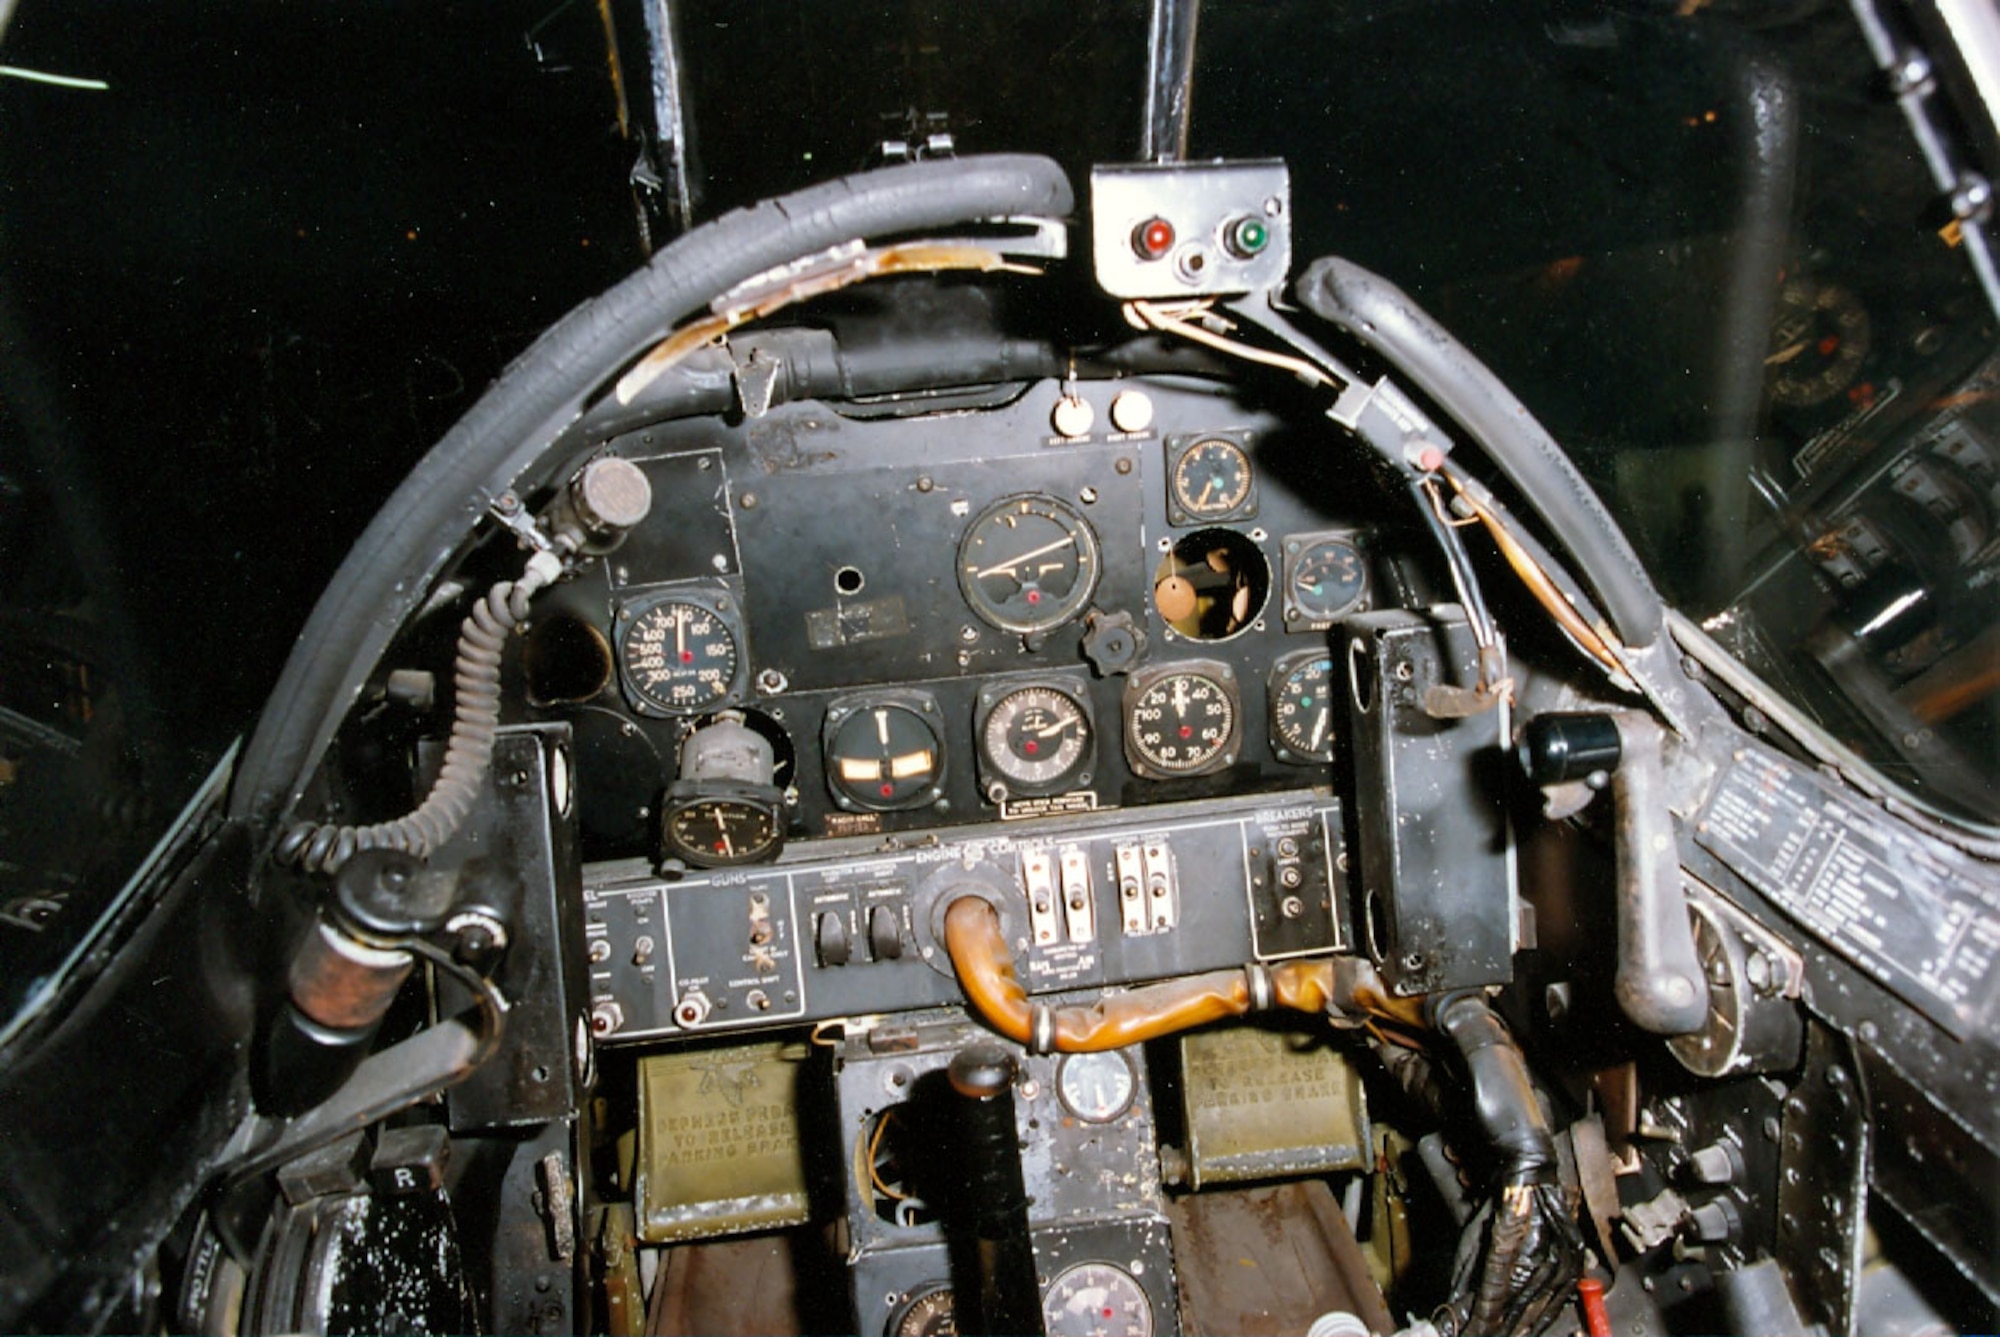 DAYTON, Ohio -- North American F-82B right cockpit at the National Museum of the United States Air Force. (U.S. Air Force photo)